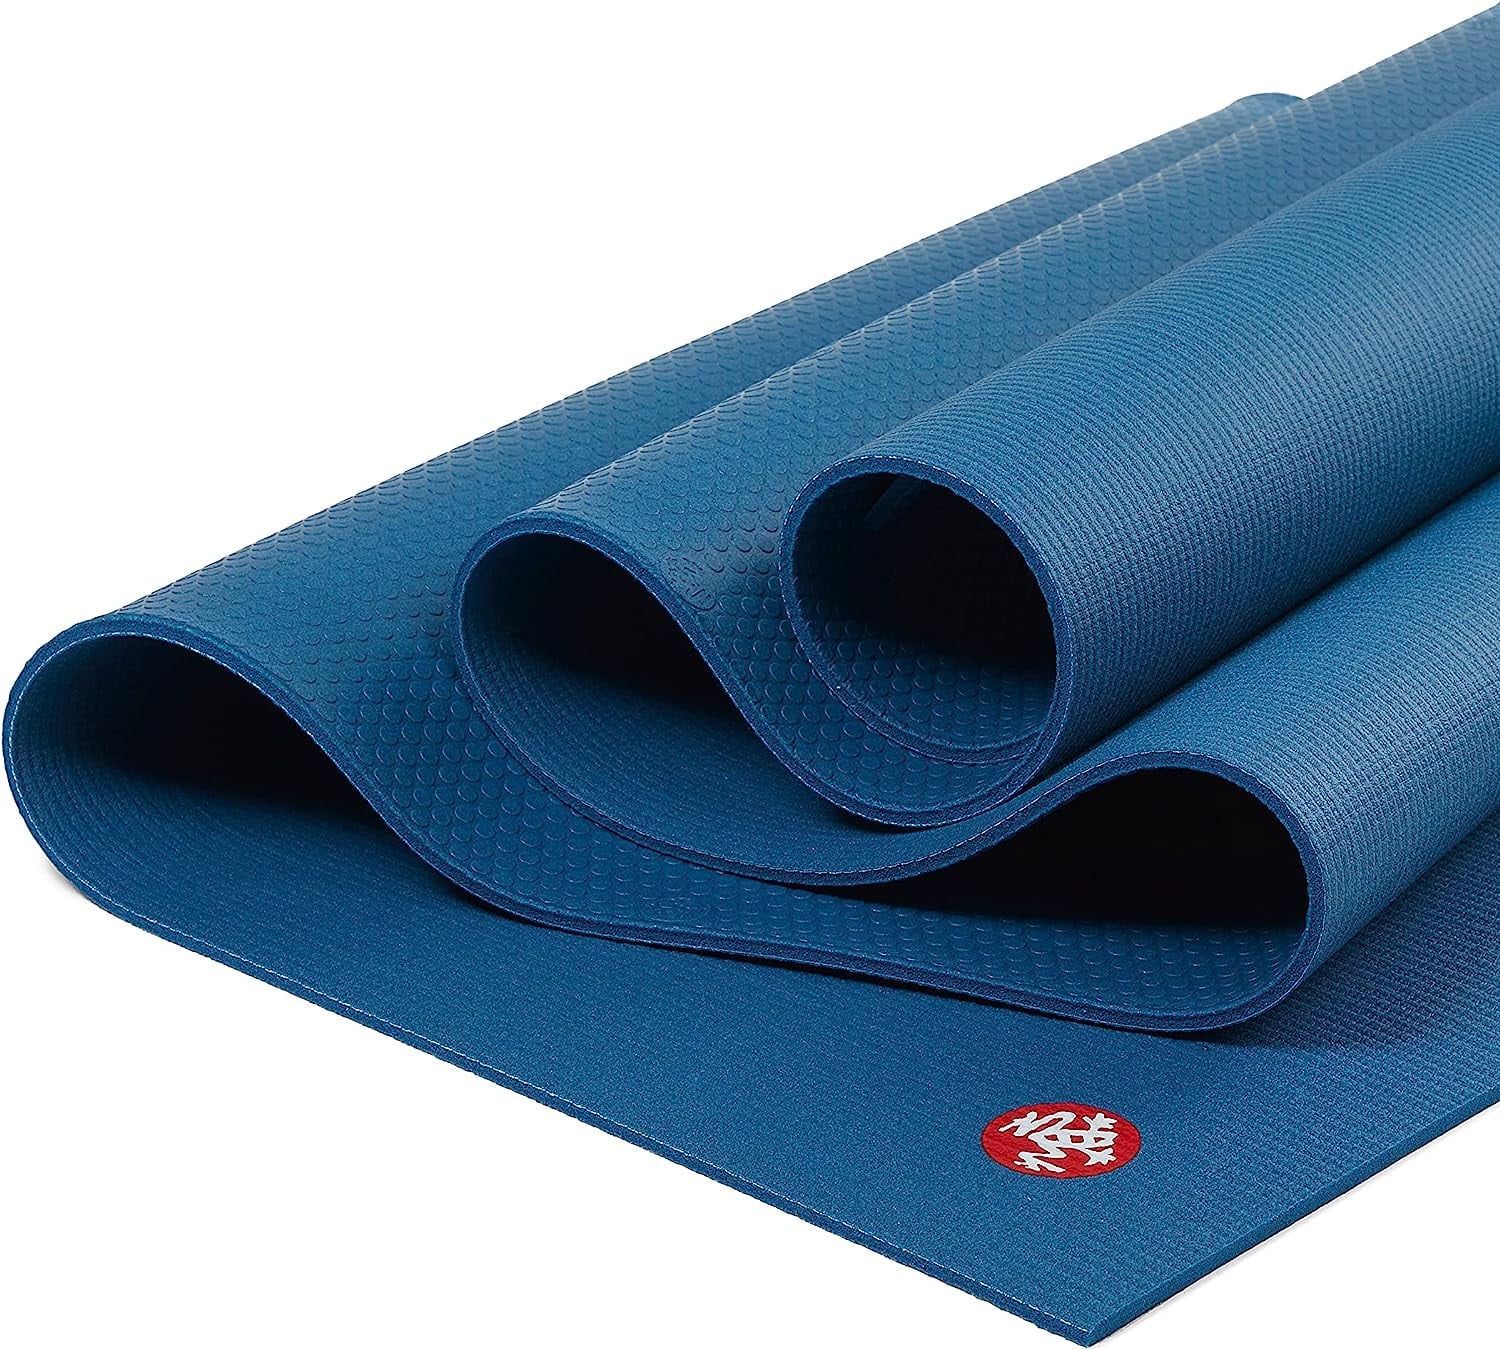 I've Tested the Best Exercise Mats - These 5 Come Out Tops